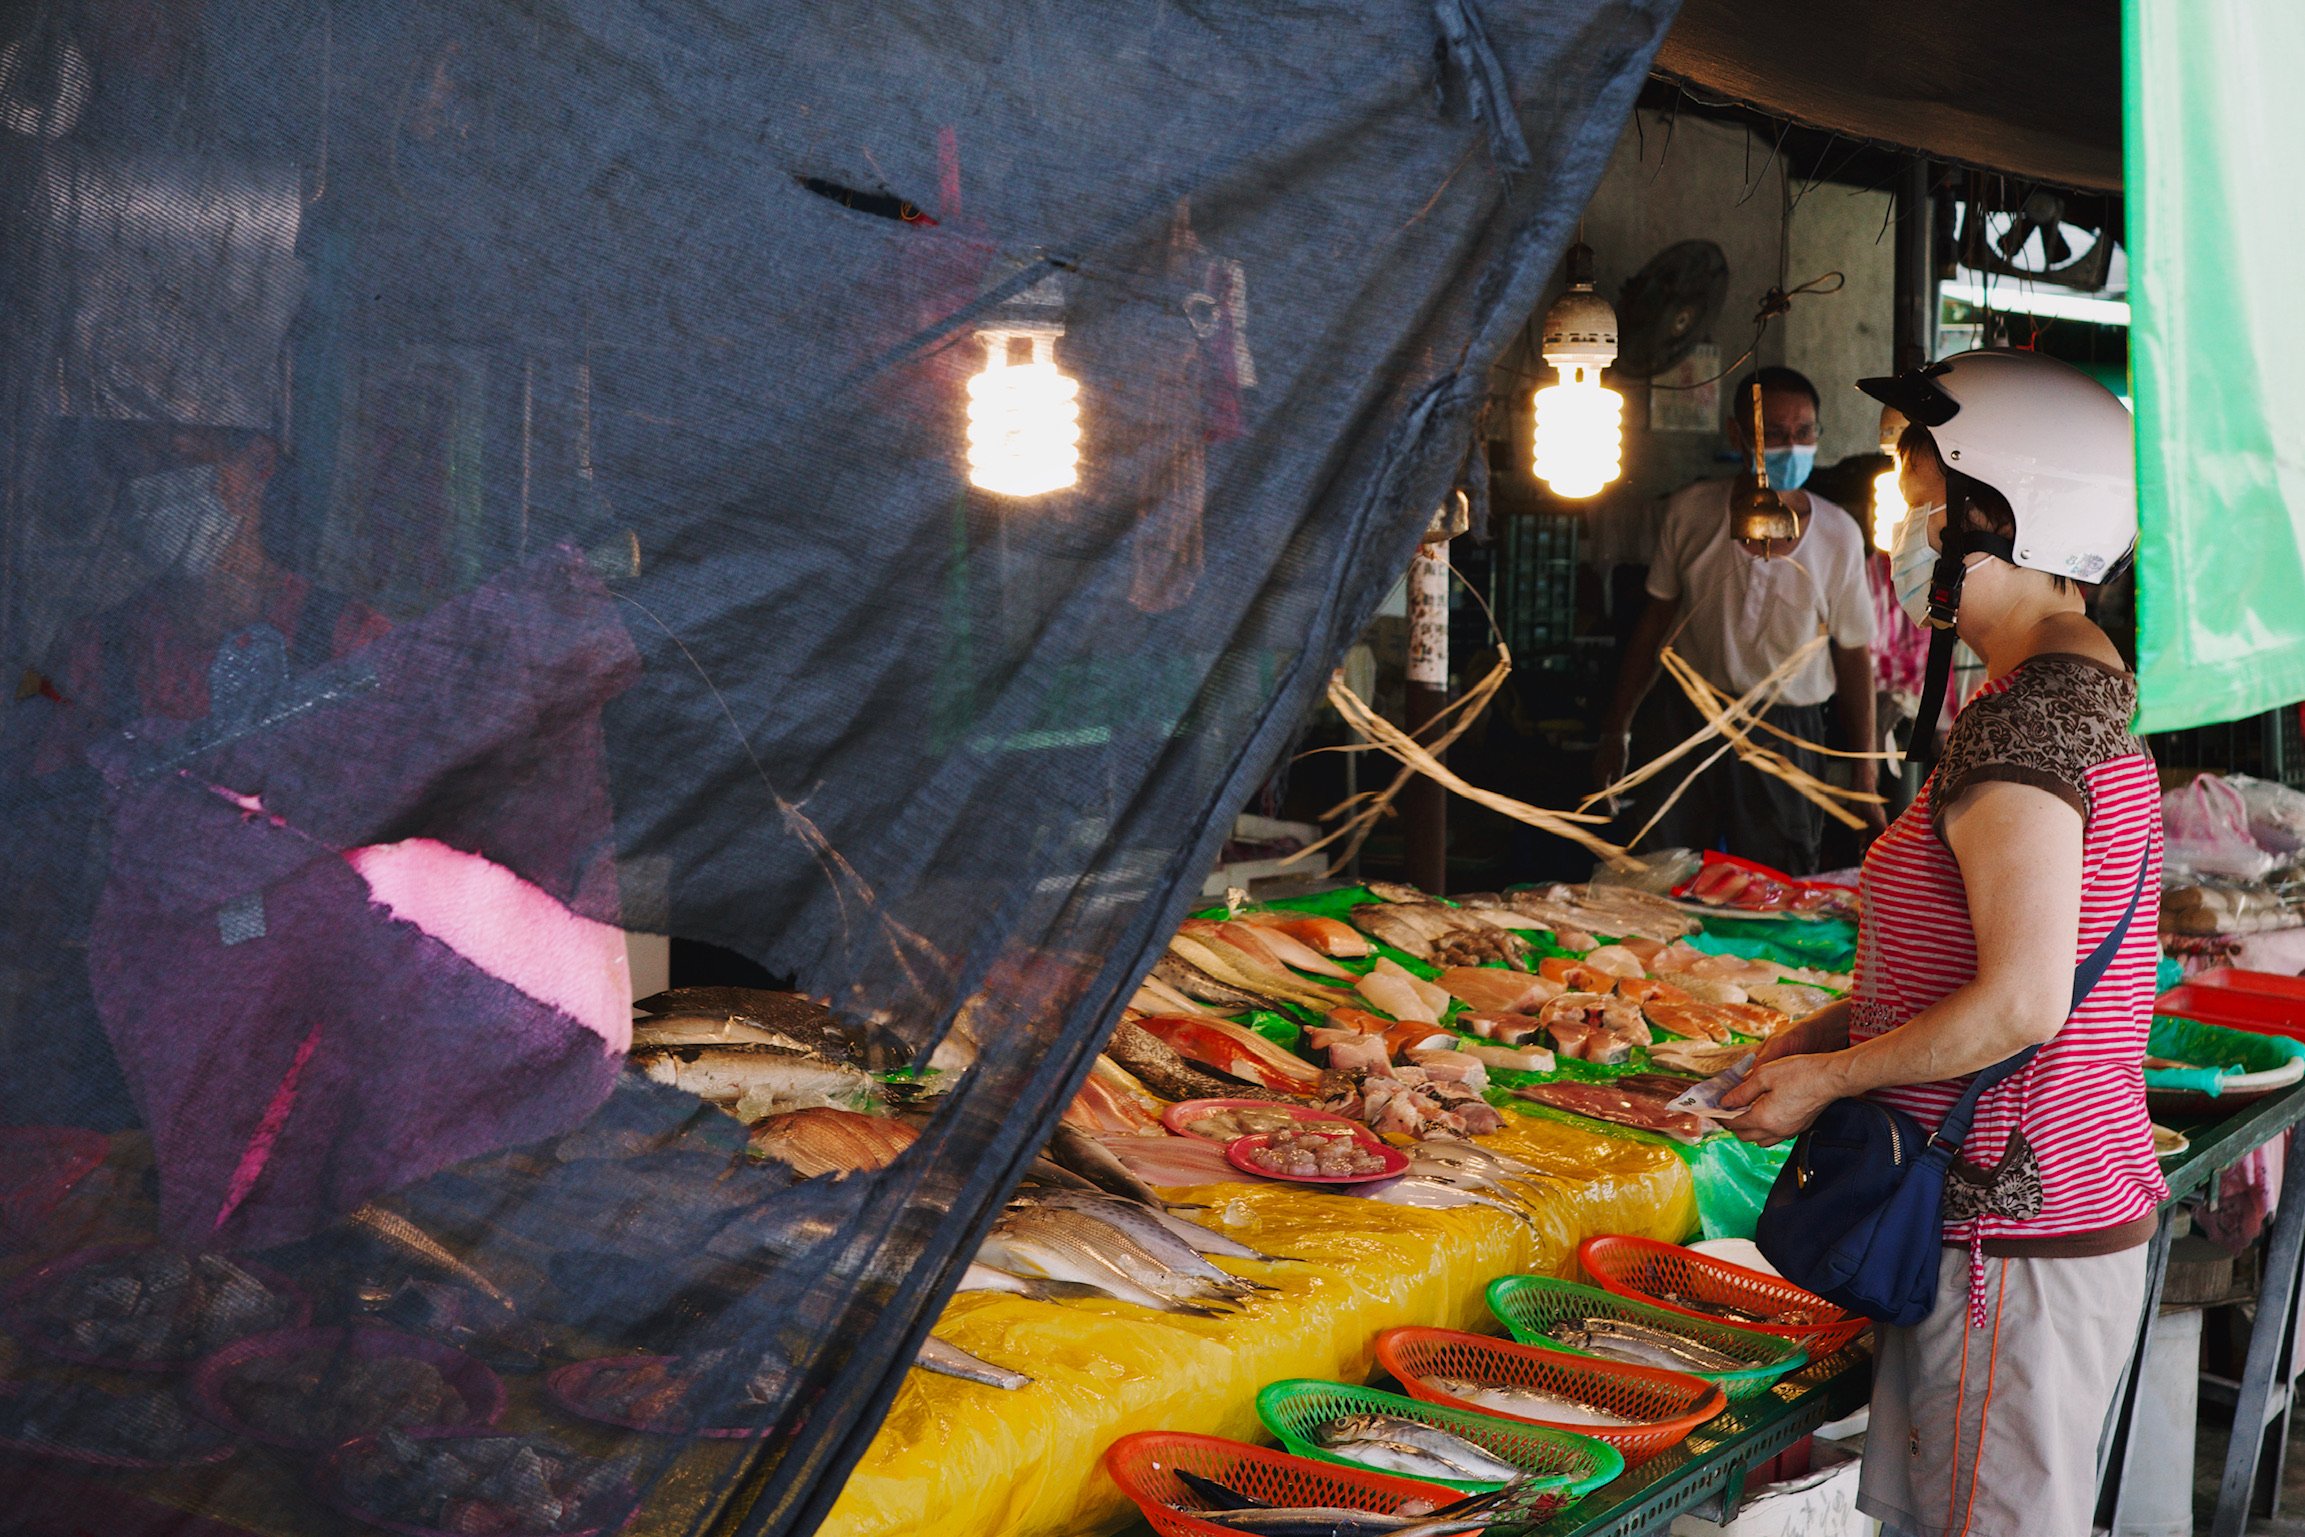 A woman wearing a scooter helmet buying fish from a vendor with bright yellow and green tarp.